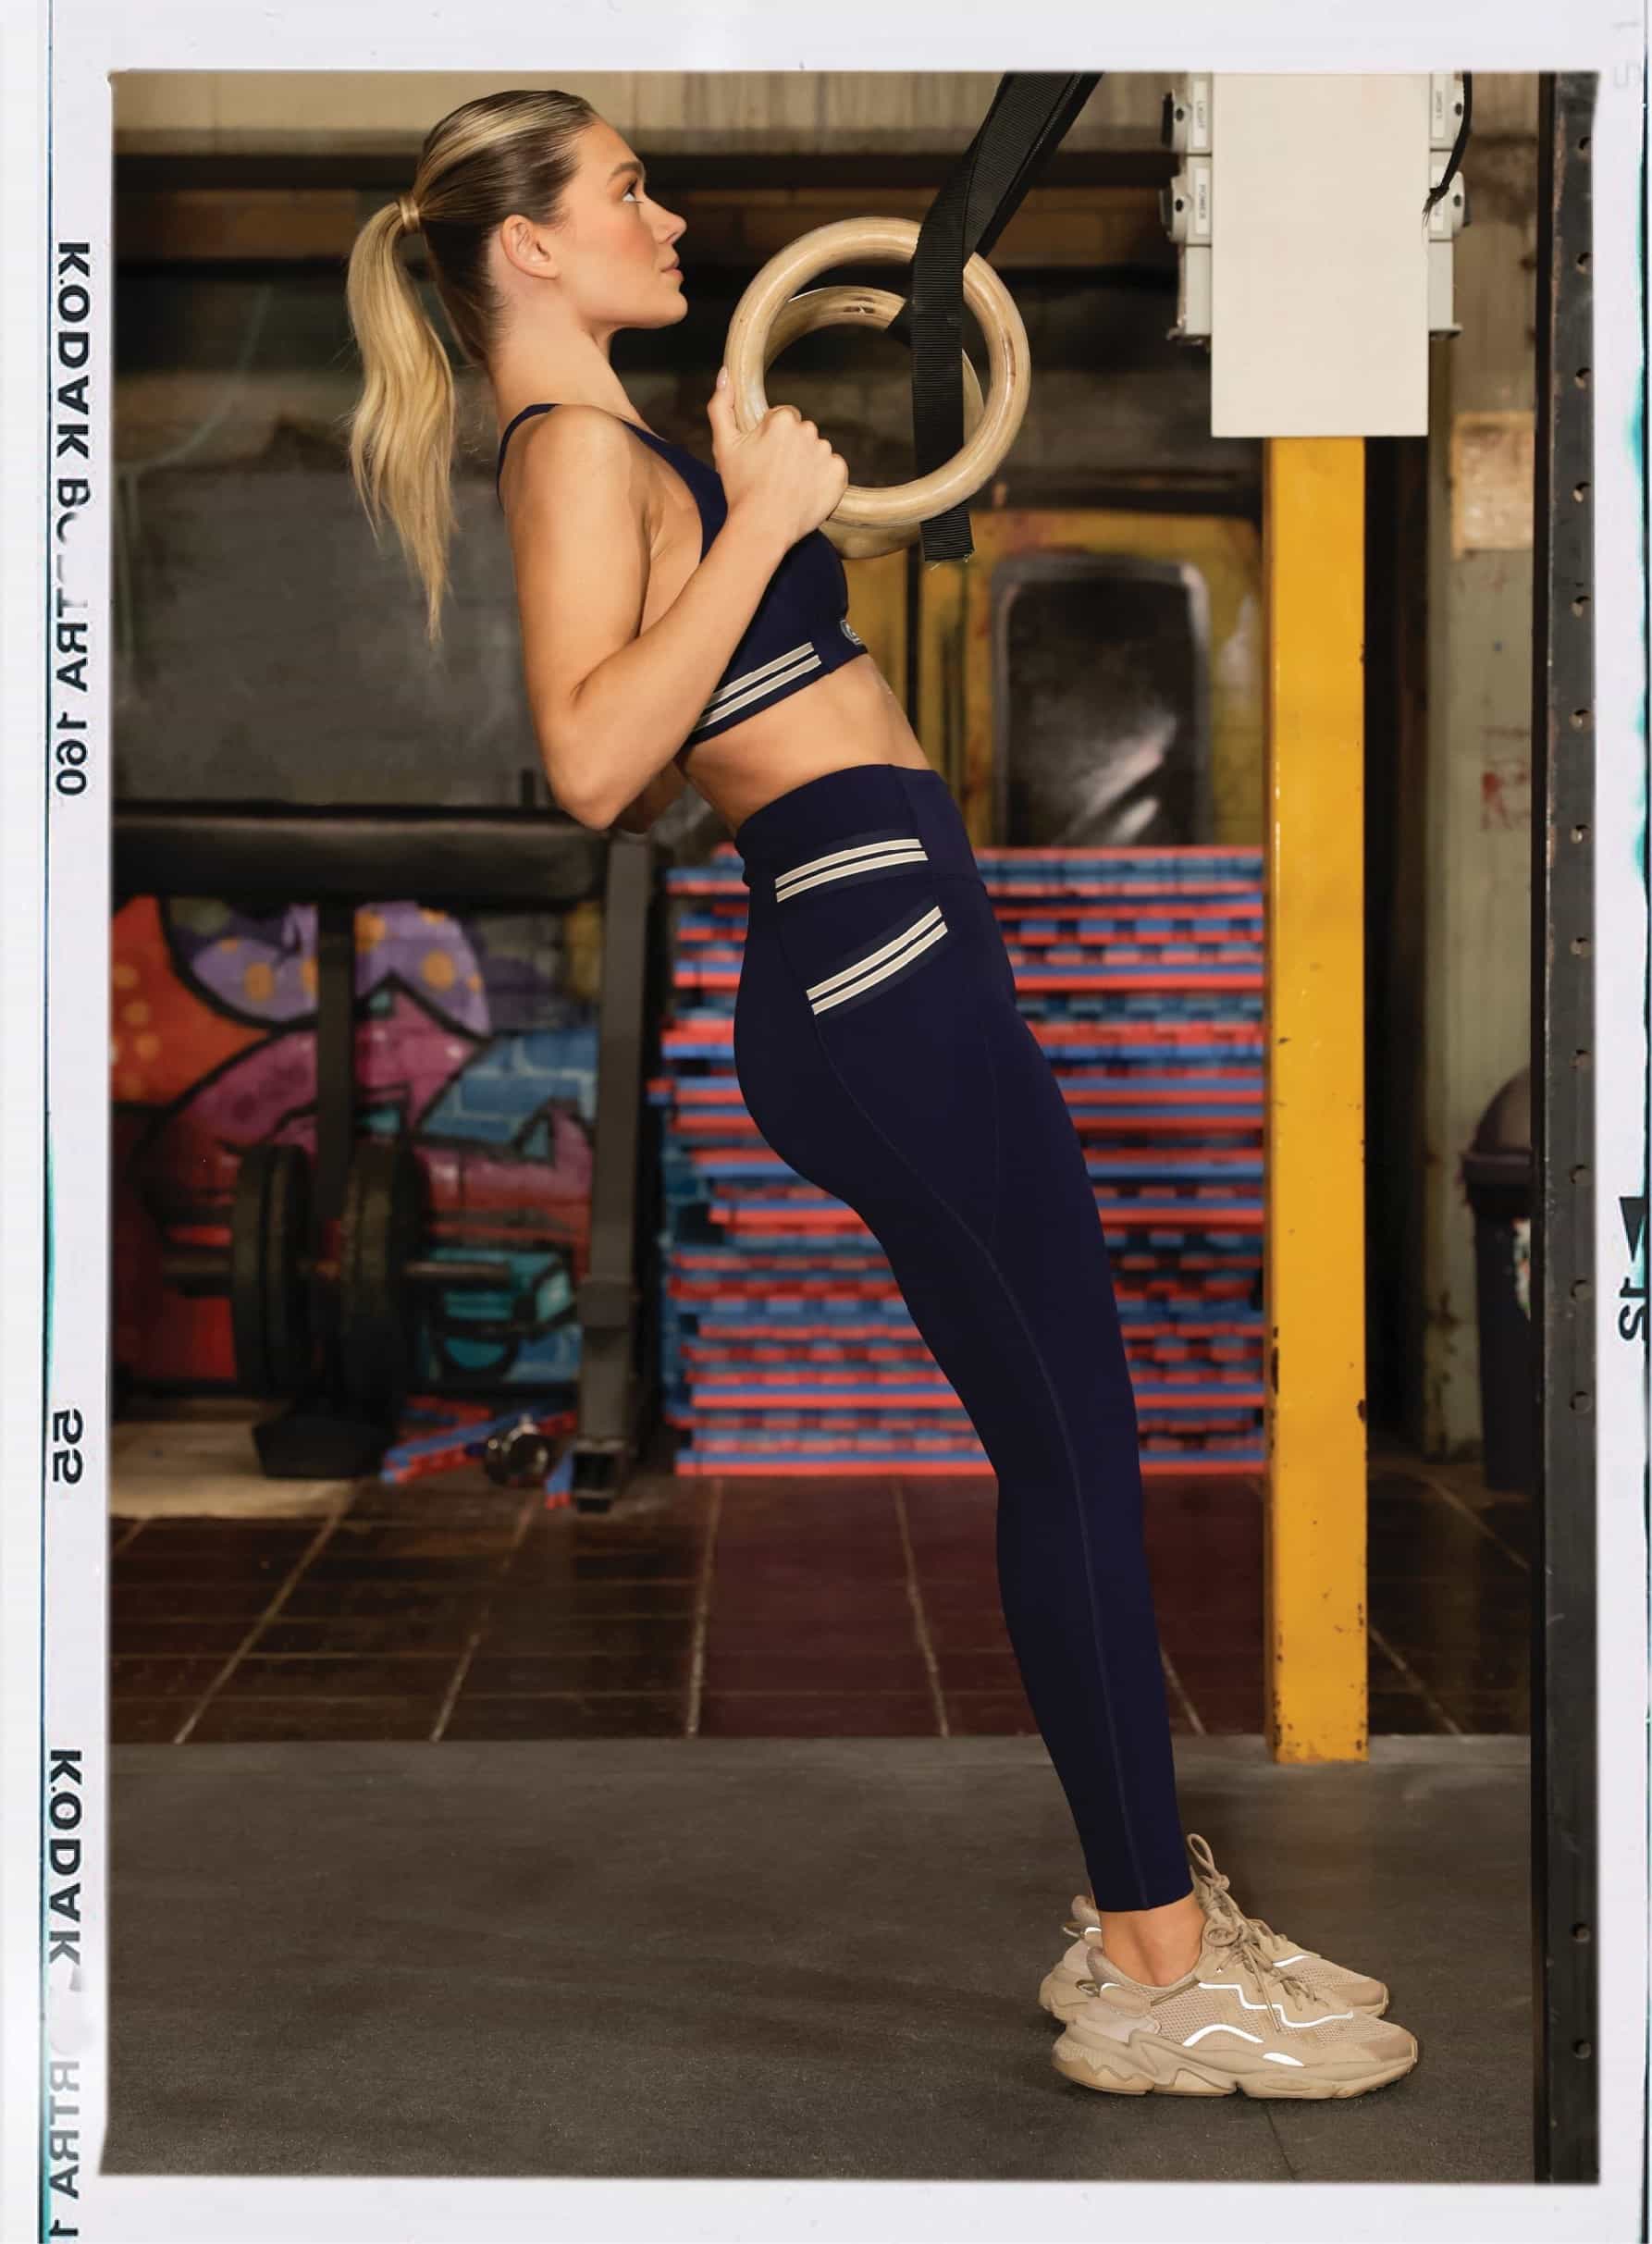 Side shot of model doing ring rows wearing matching navy sports bra and leggings with cream detailing on pockets